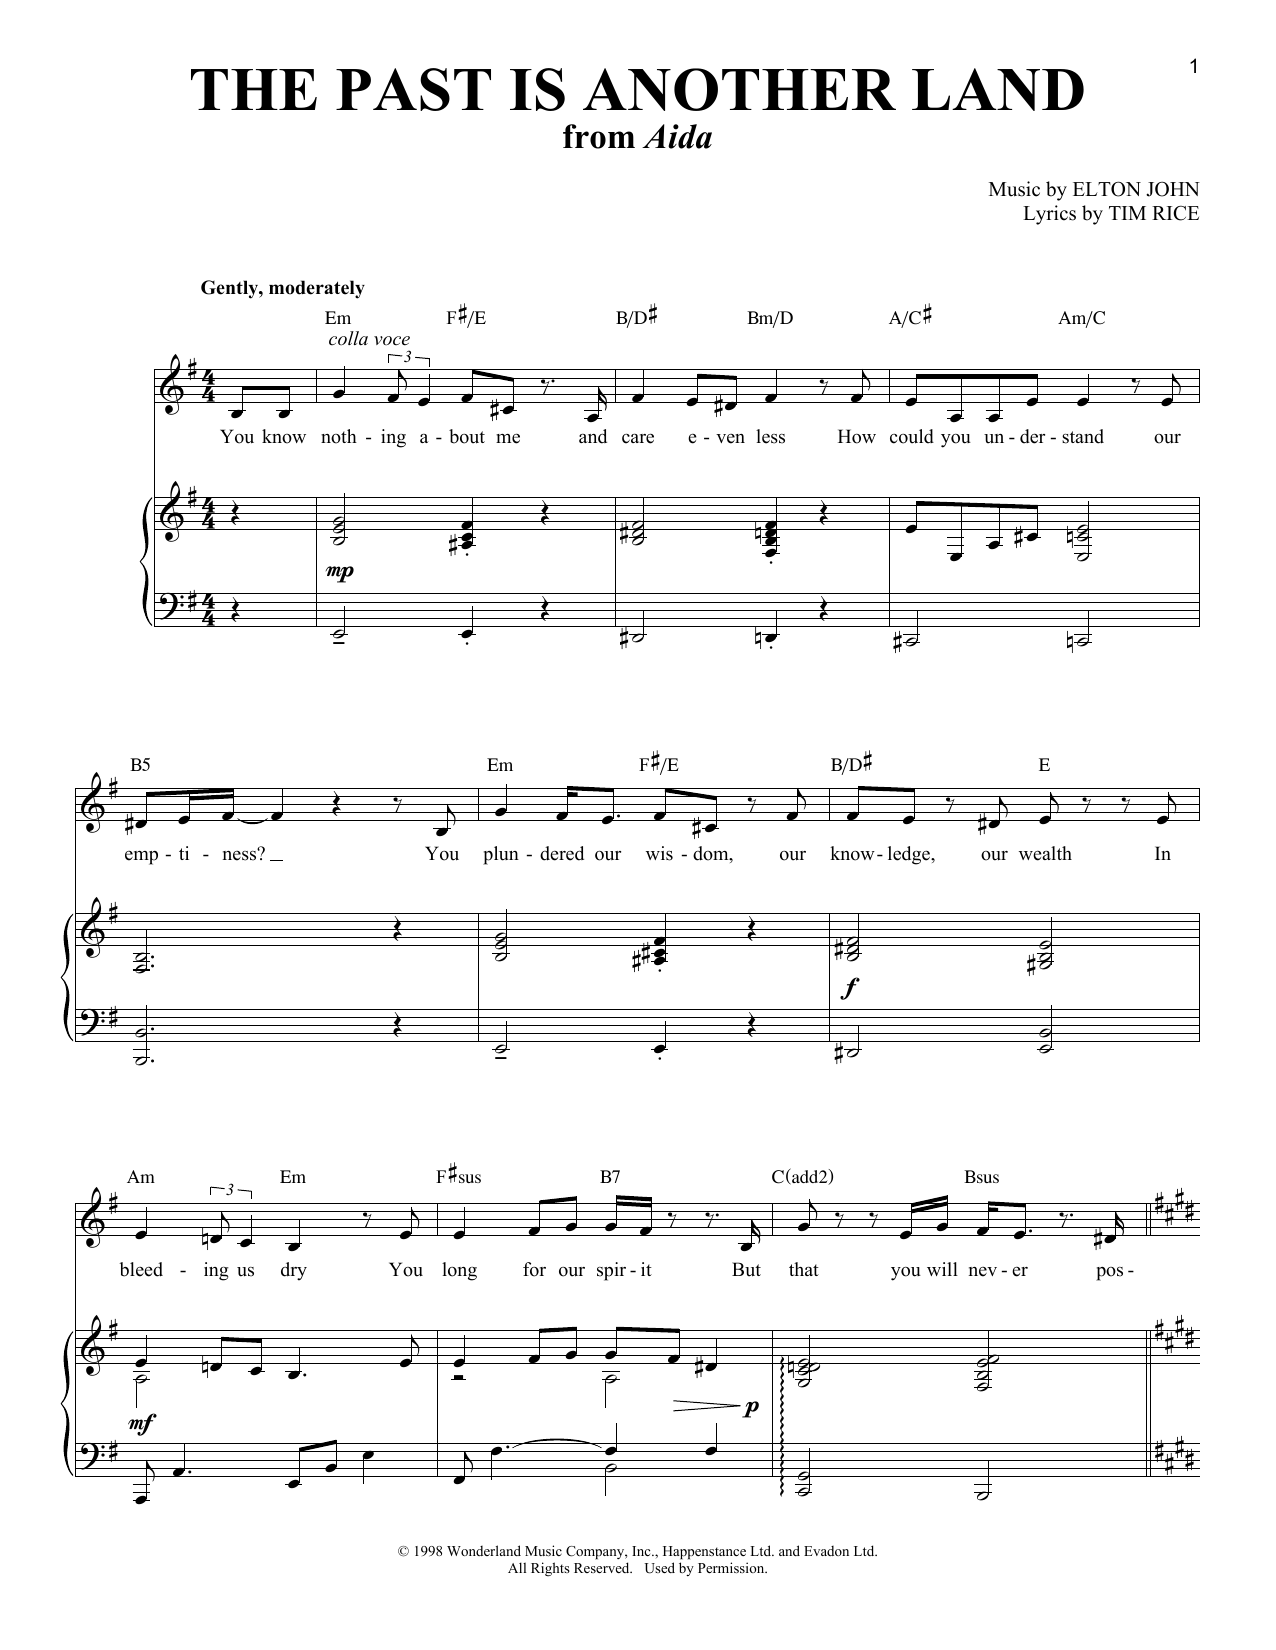 Download Elton John The Past Is Another Land (from Aida) Sheet Music